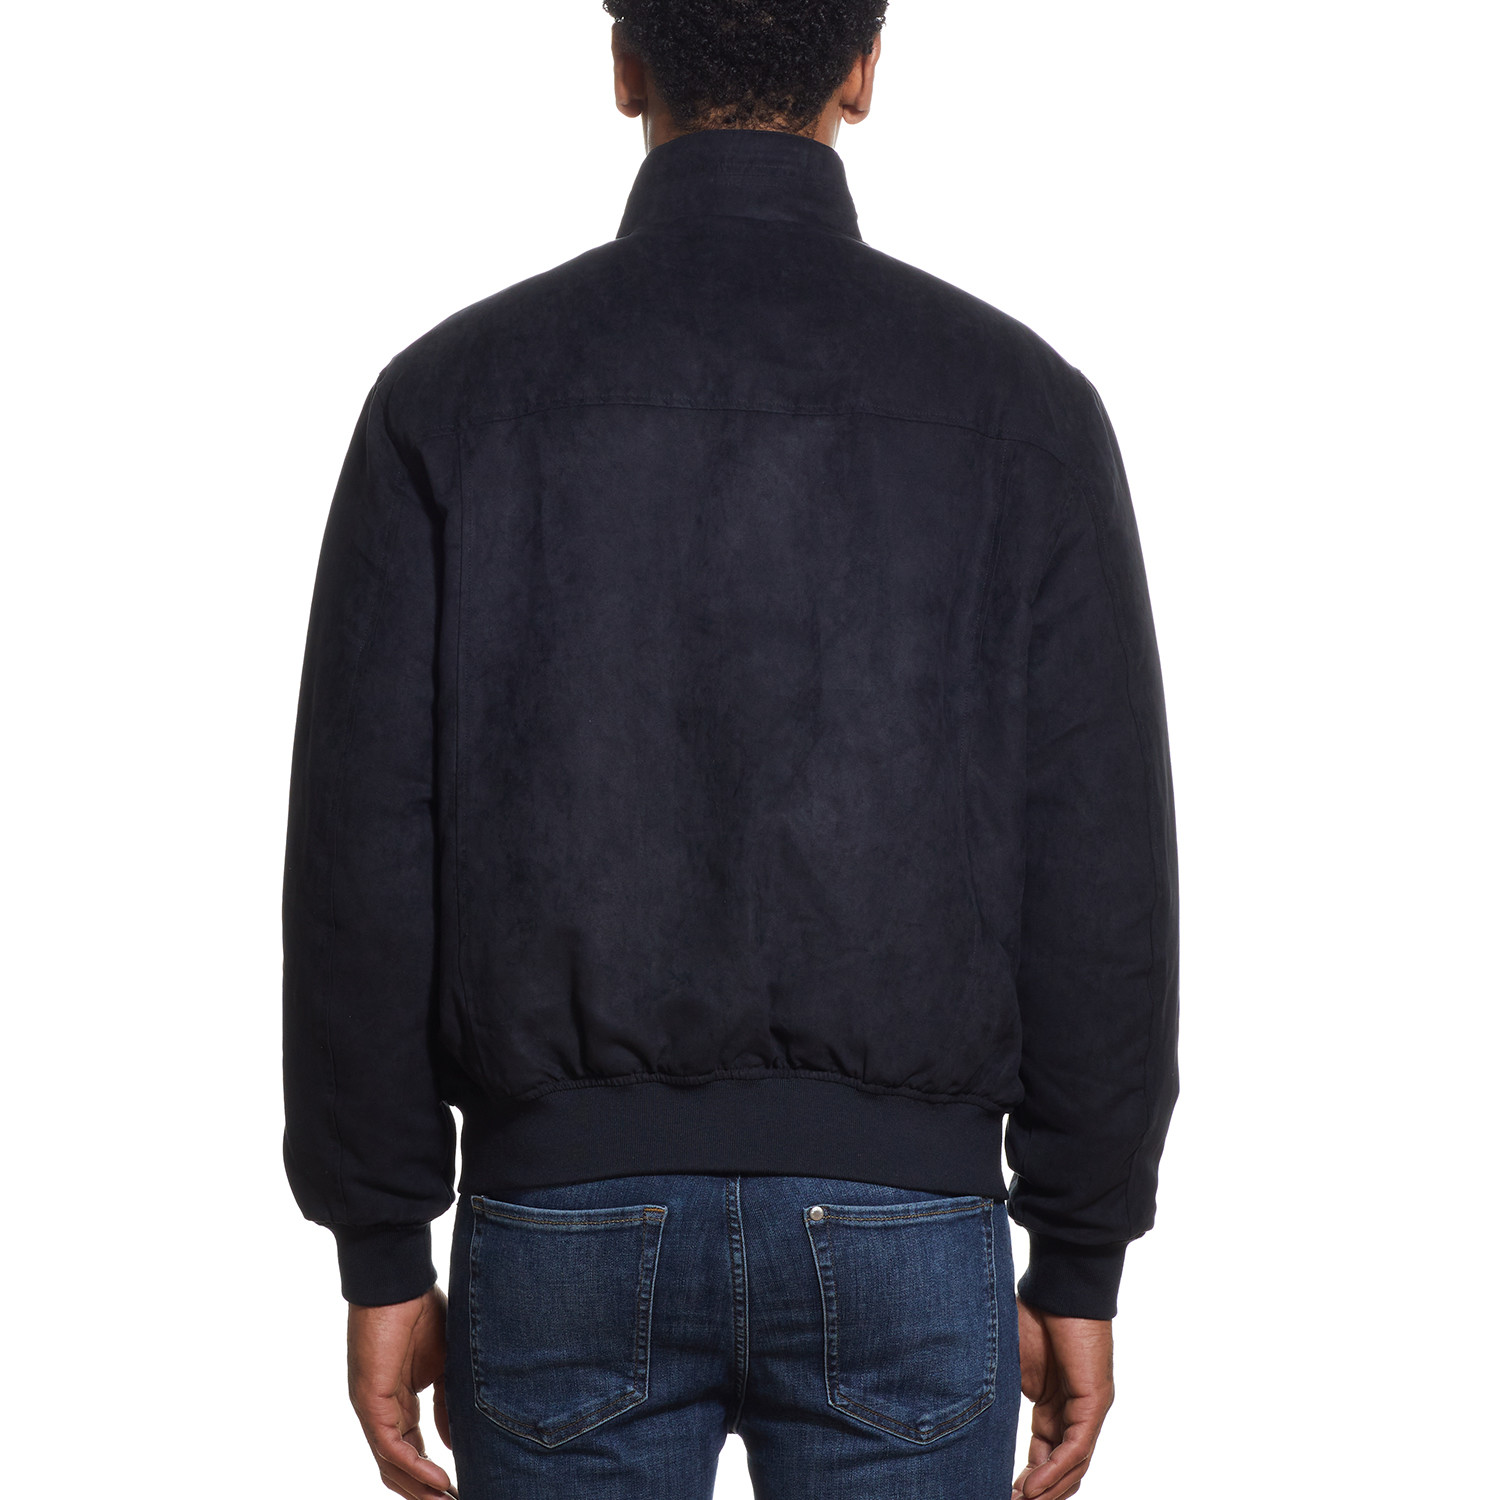 Microsuede Bomber Jacket // Black (S) - The Very Warm - Touch of Modern